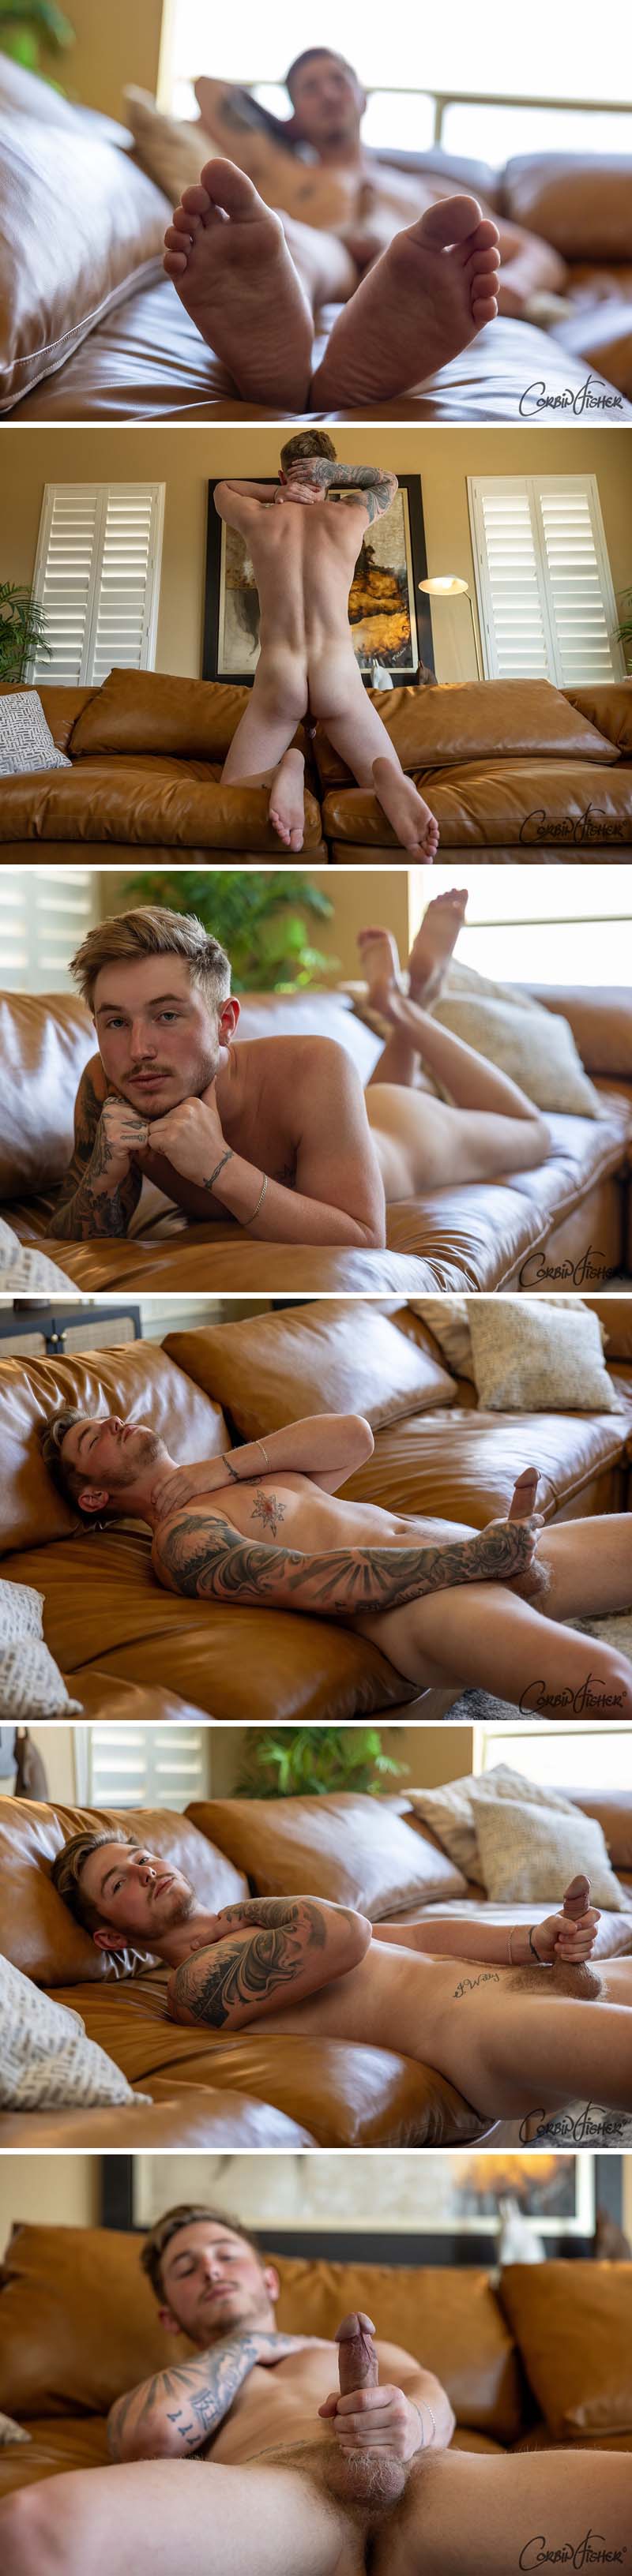 Ben Shows Off at CorbinFisher